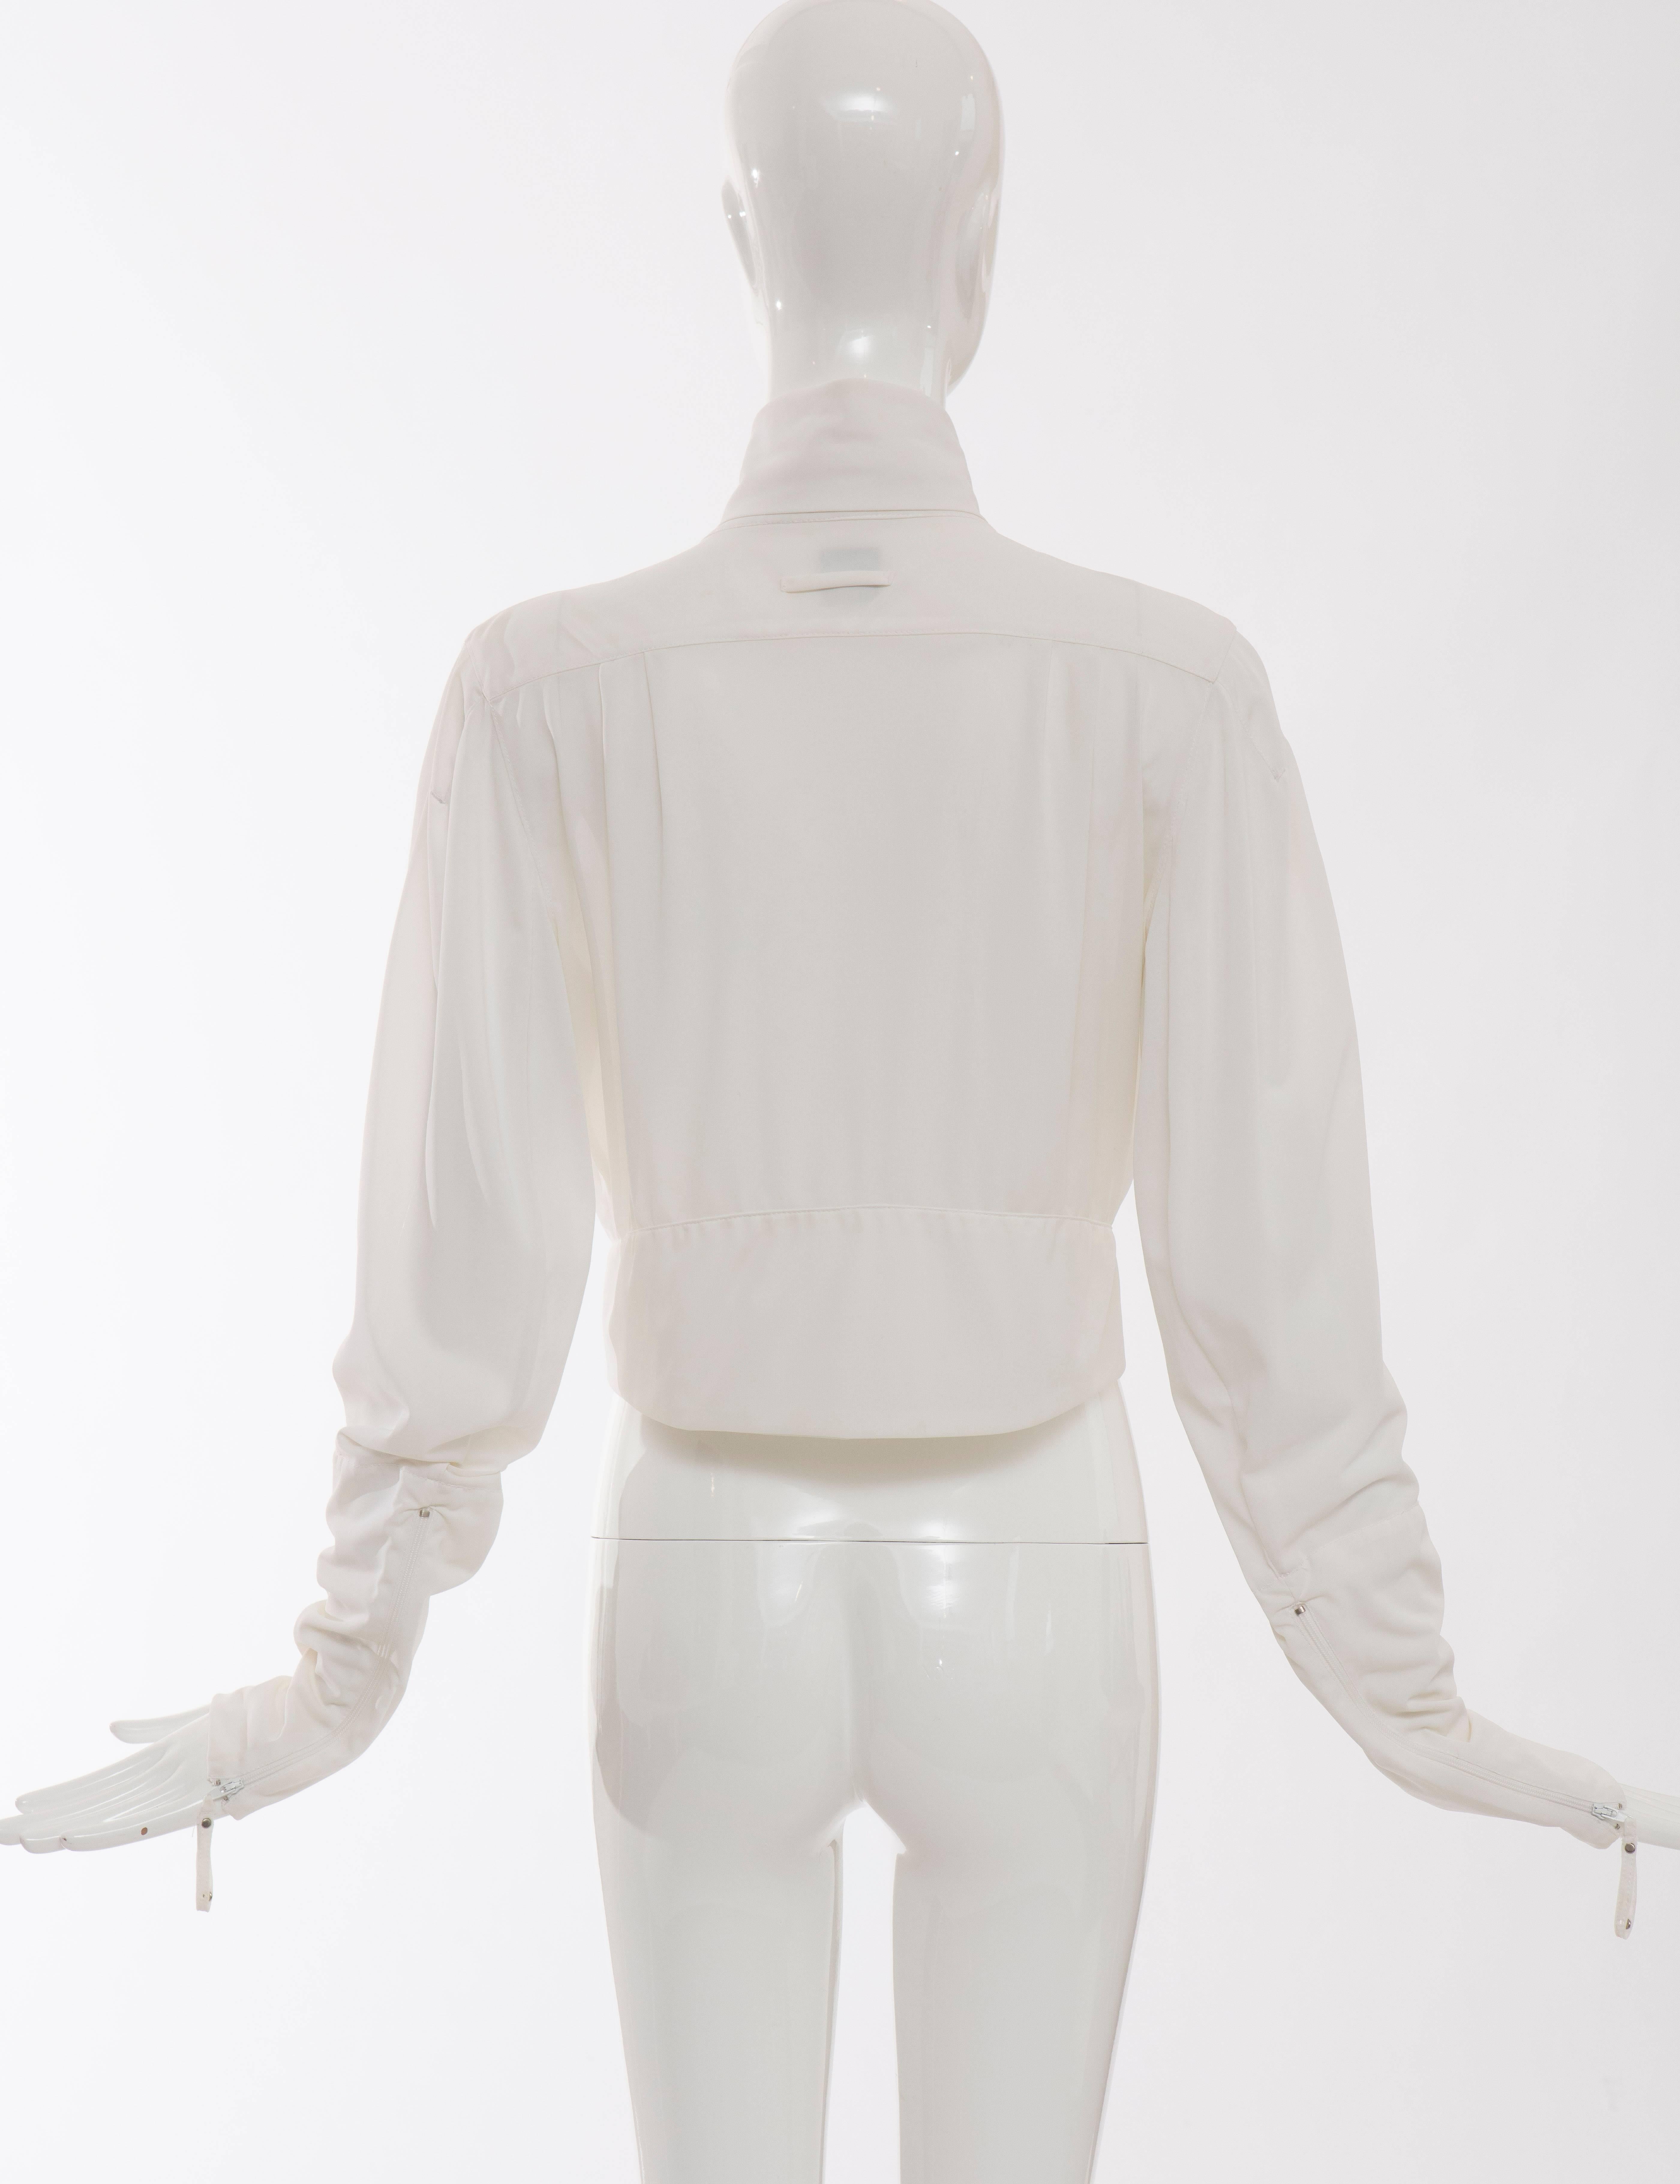 Jean Paul Gaultier White Nylon Zip Front Jacket, Circa 1990s In Excellent Condition For Sale In Cincinnati, OH